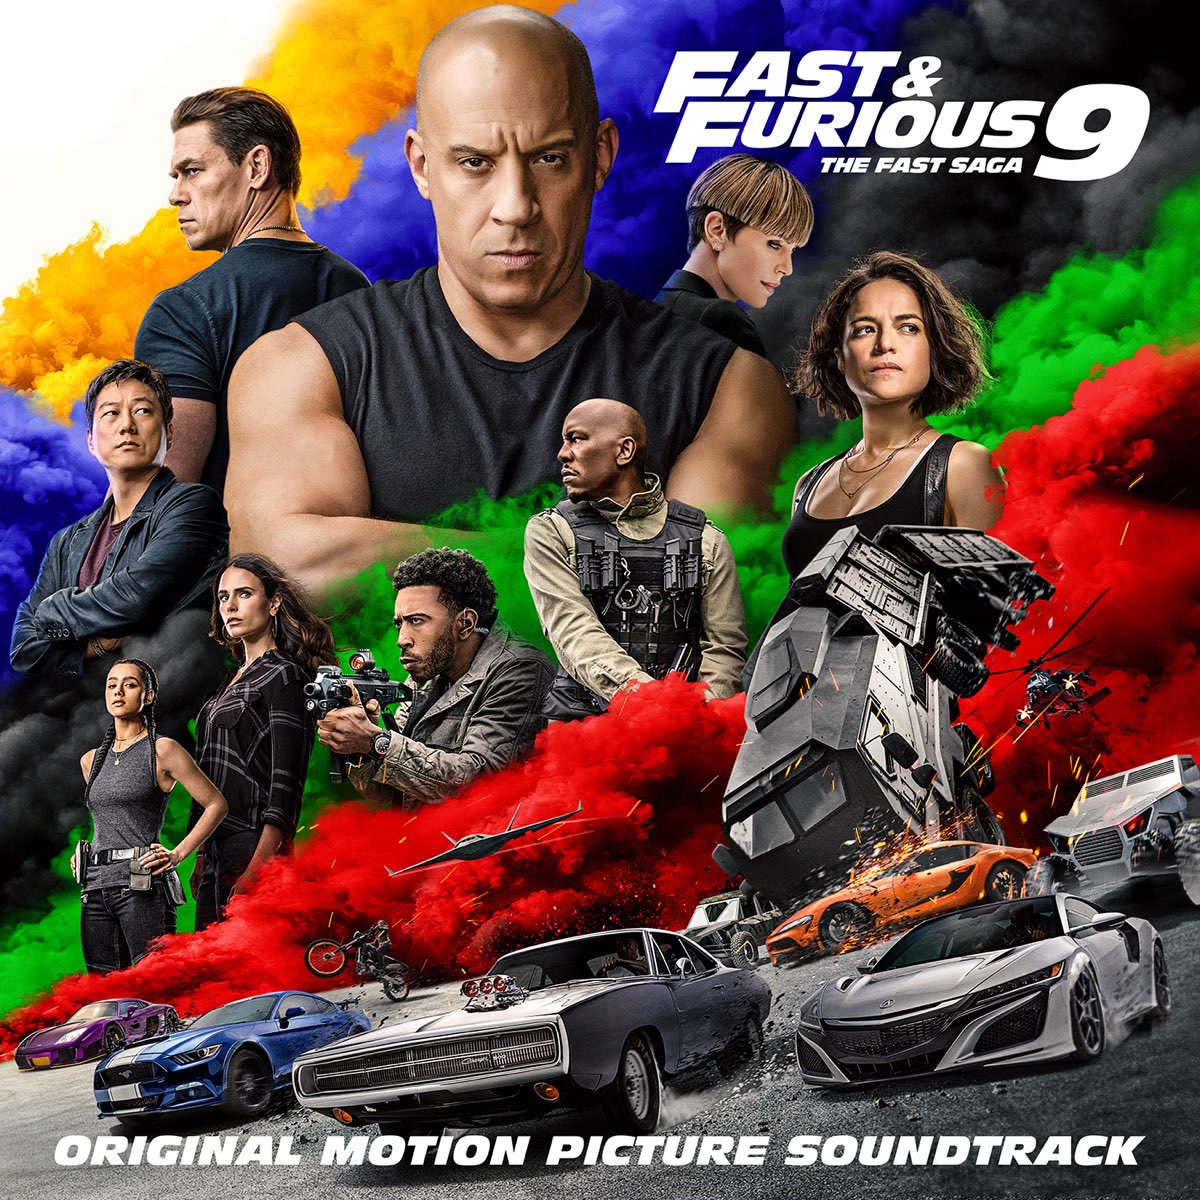 Fast & Furious 9: The Fast Saga (Original Motion Picture Soundtrack) by  Various Artists on Apple Music